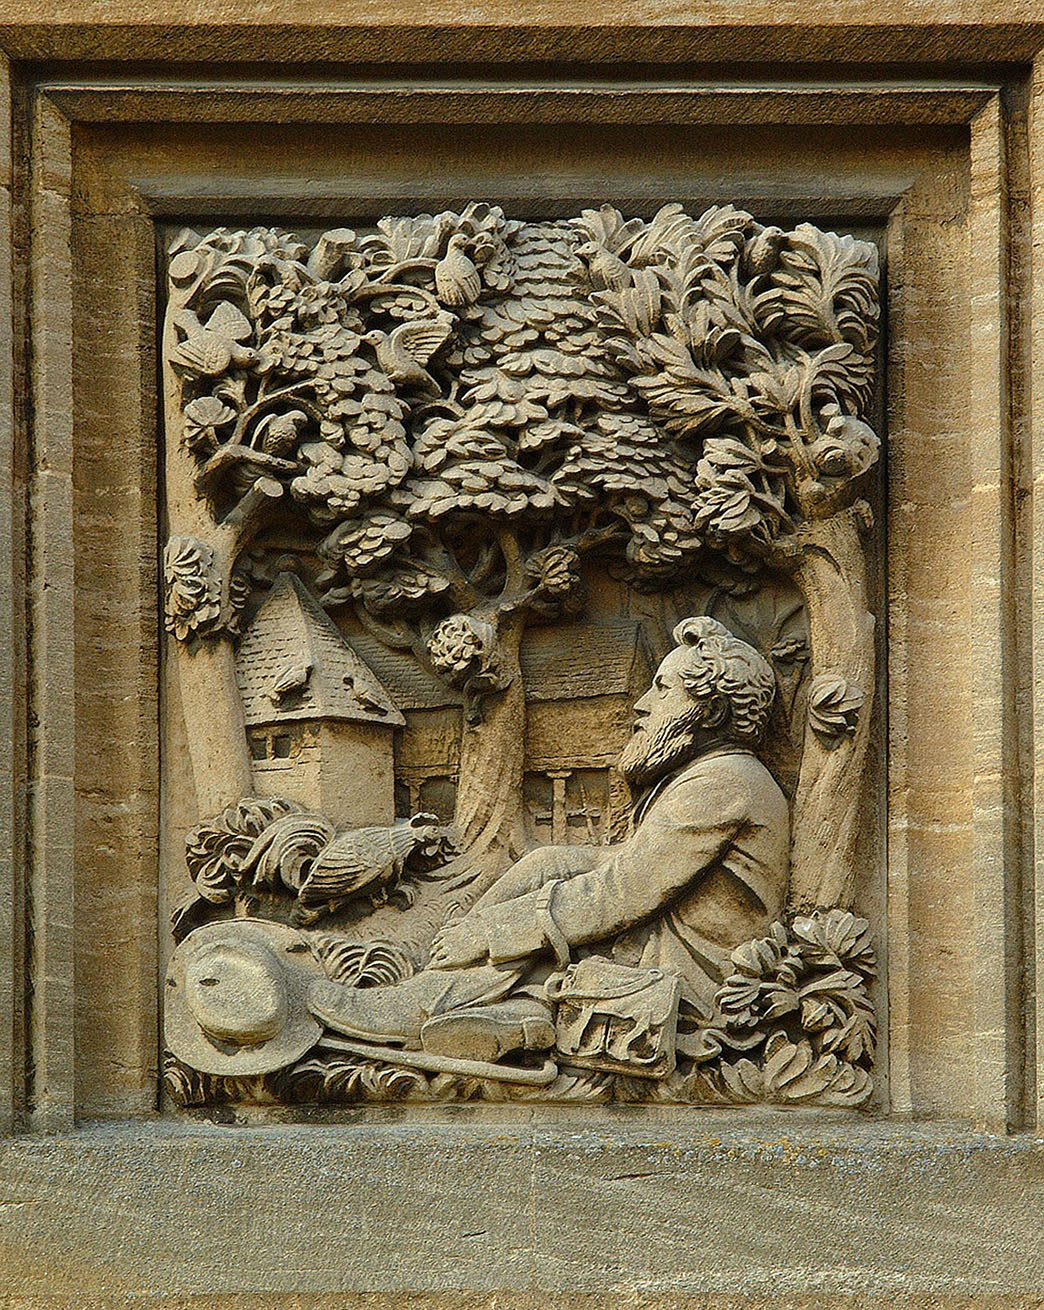 Stone carving on one of the cottages in the village showing William Morris sitting under a tree at Kelmscott with the Dovecote and farm barns behind him.